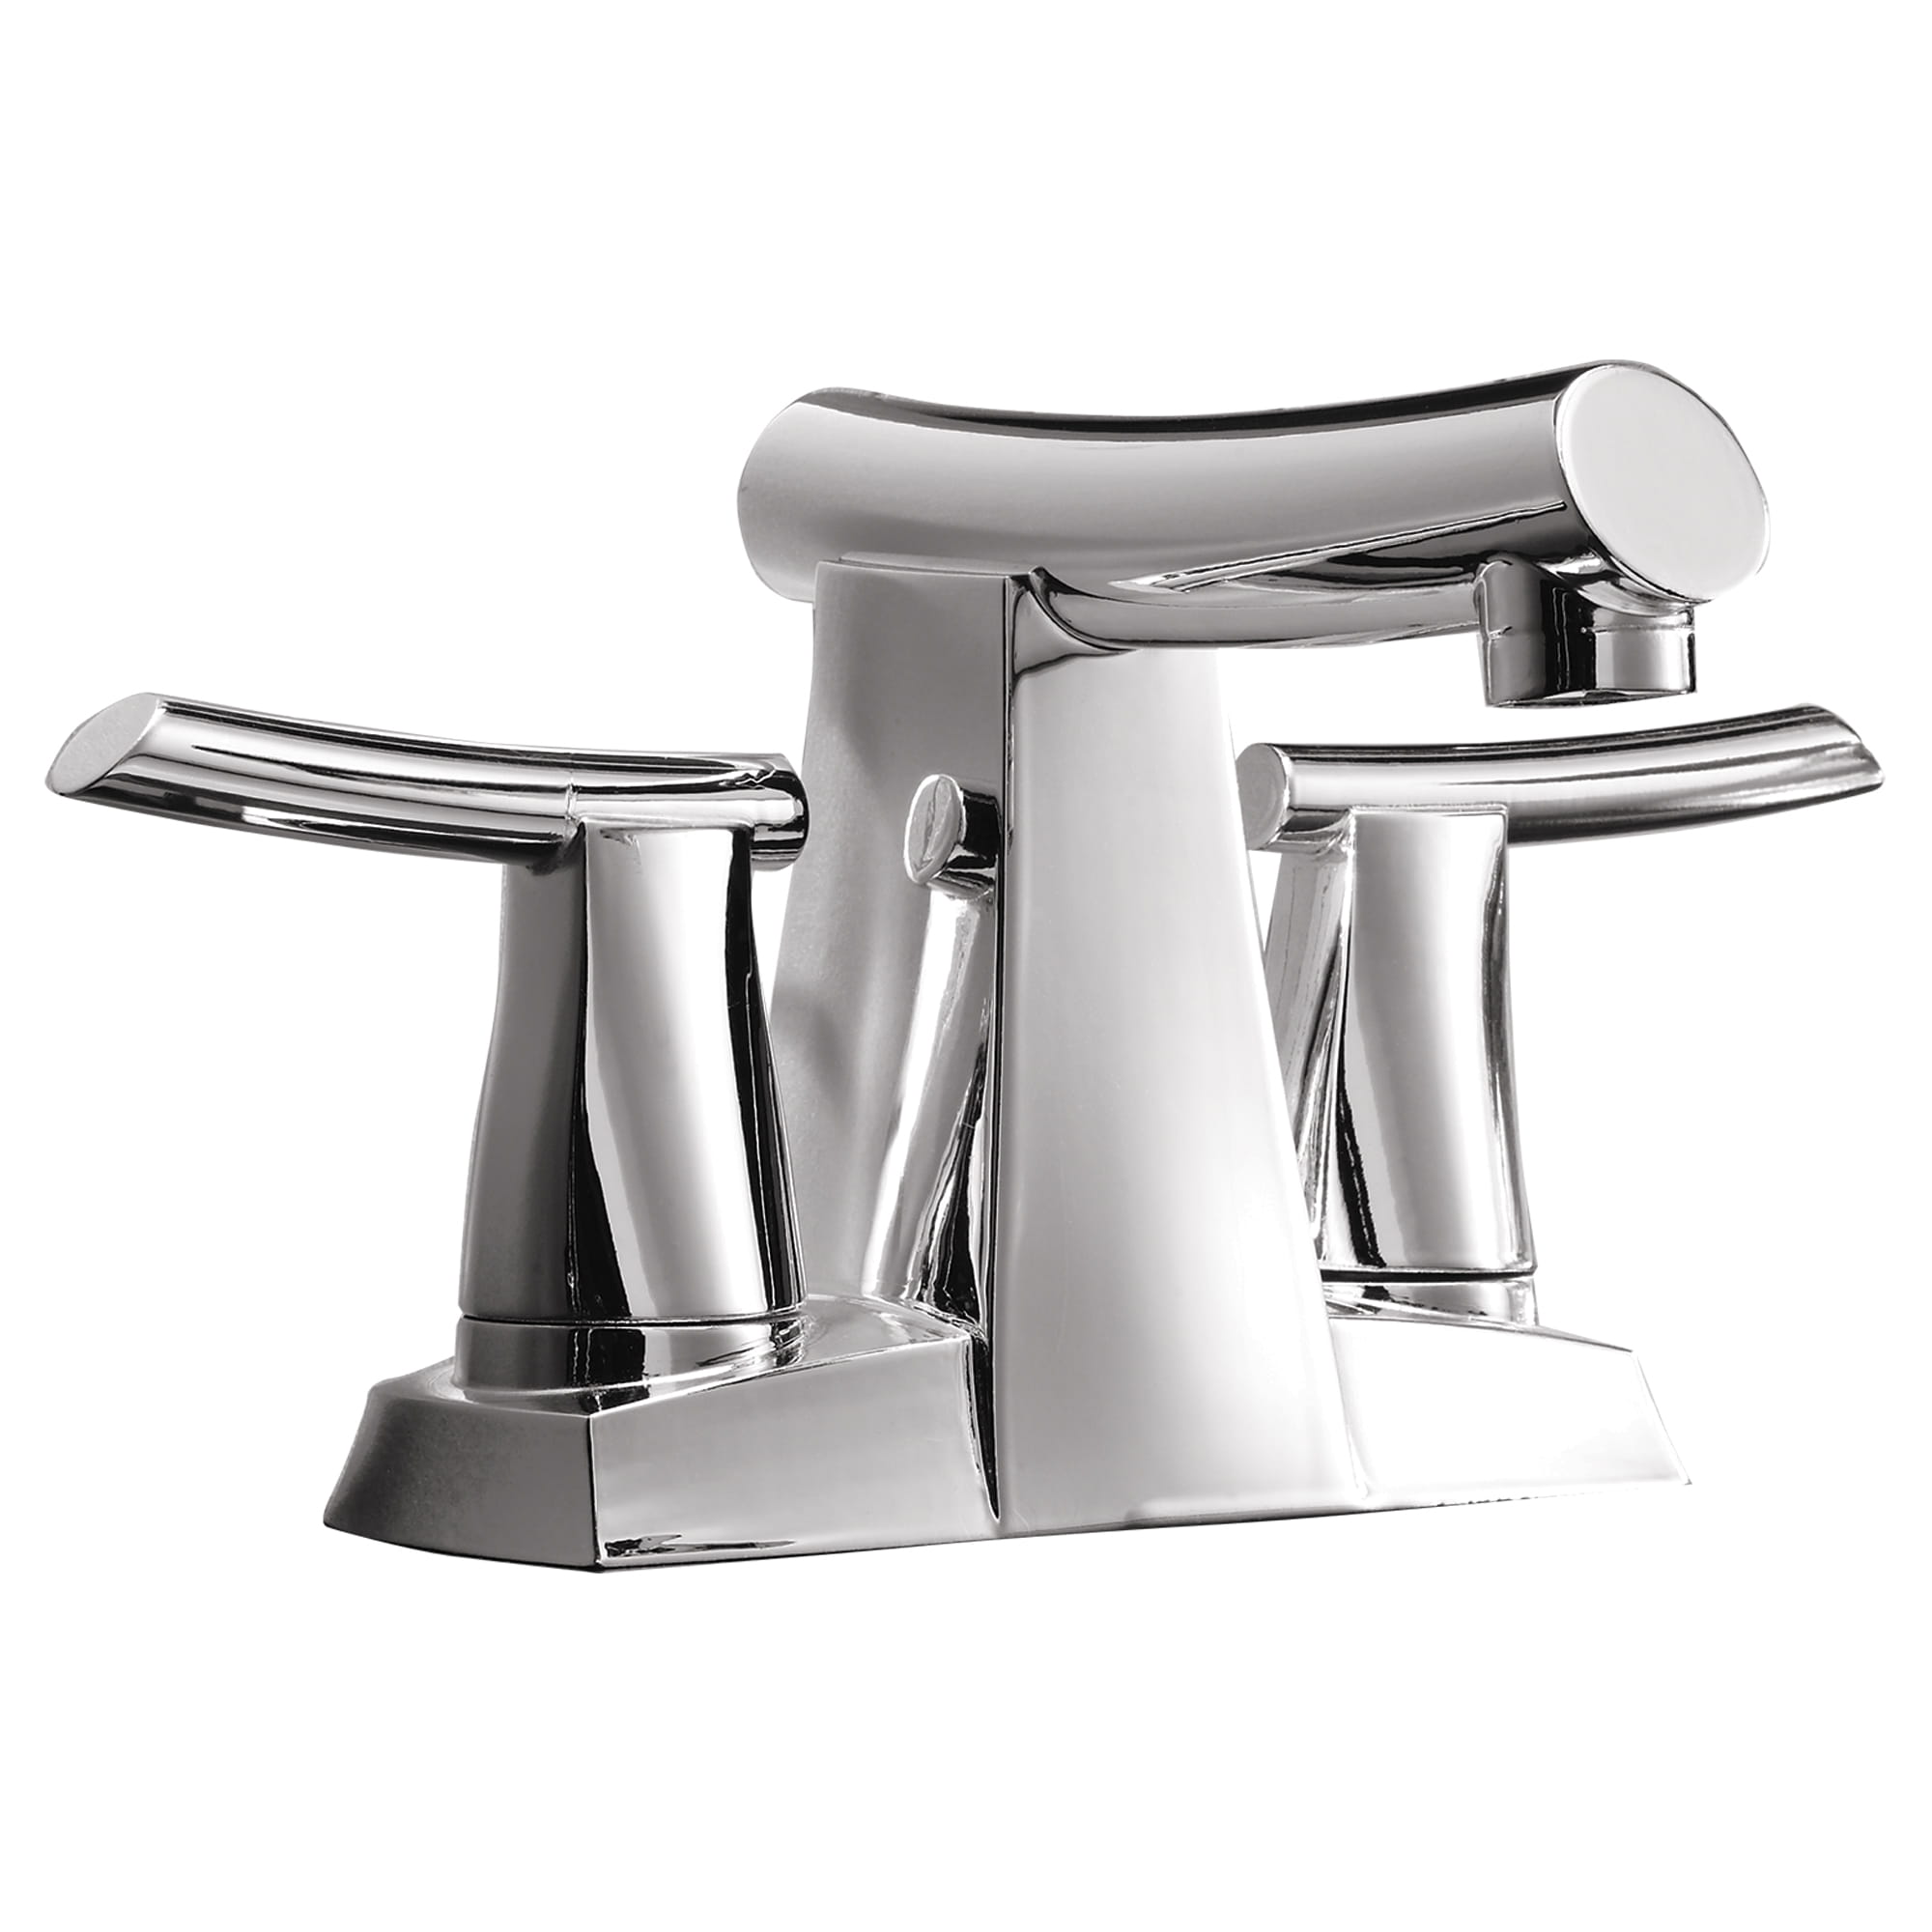 Green Tea 4 Inch Centerset Pull-Out Bathroom Faucet